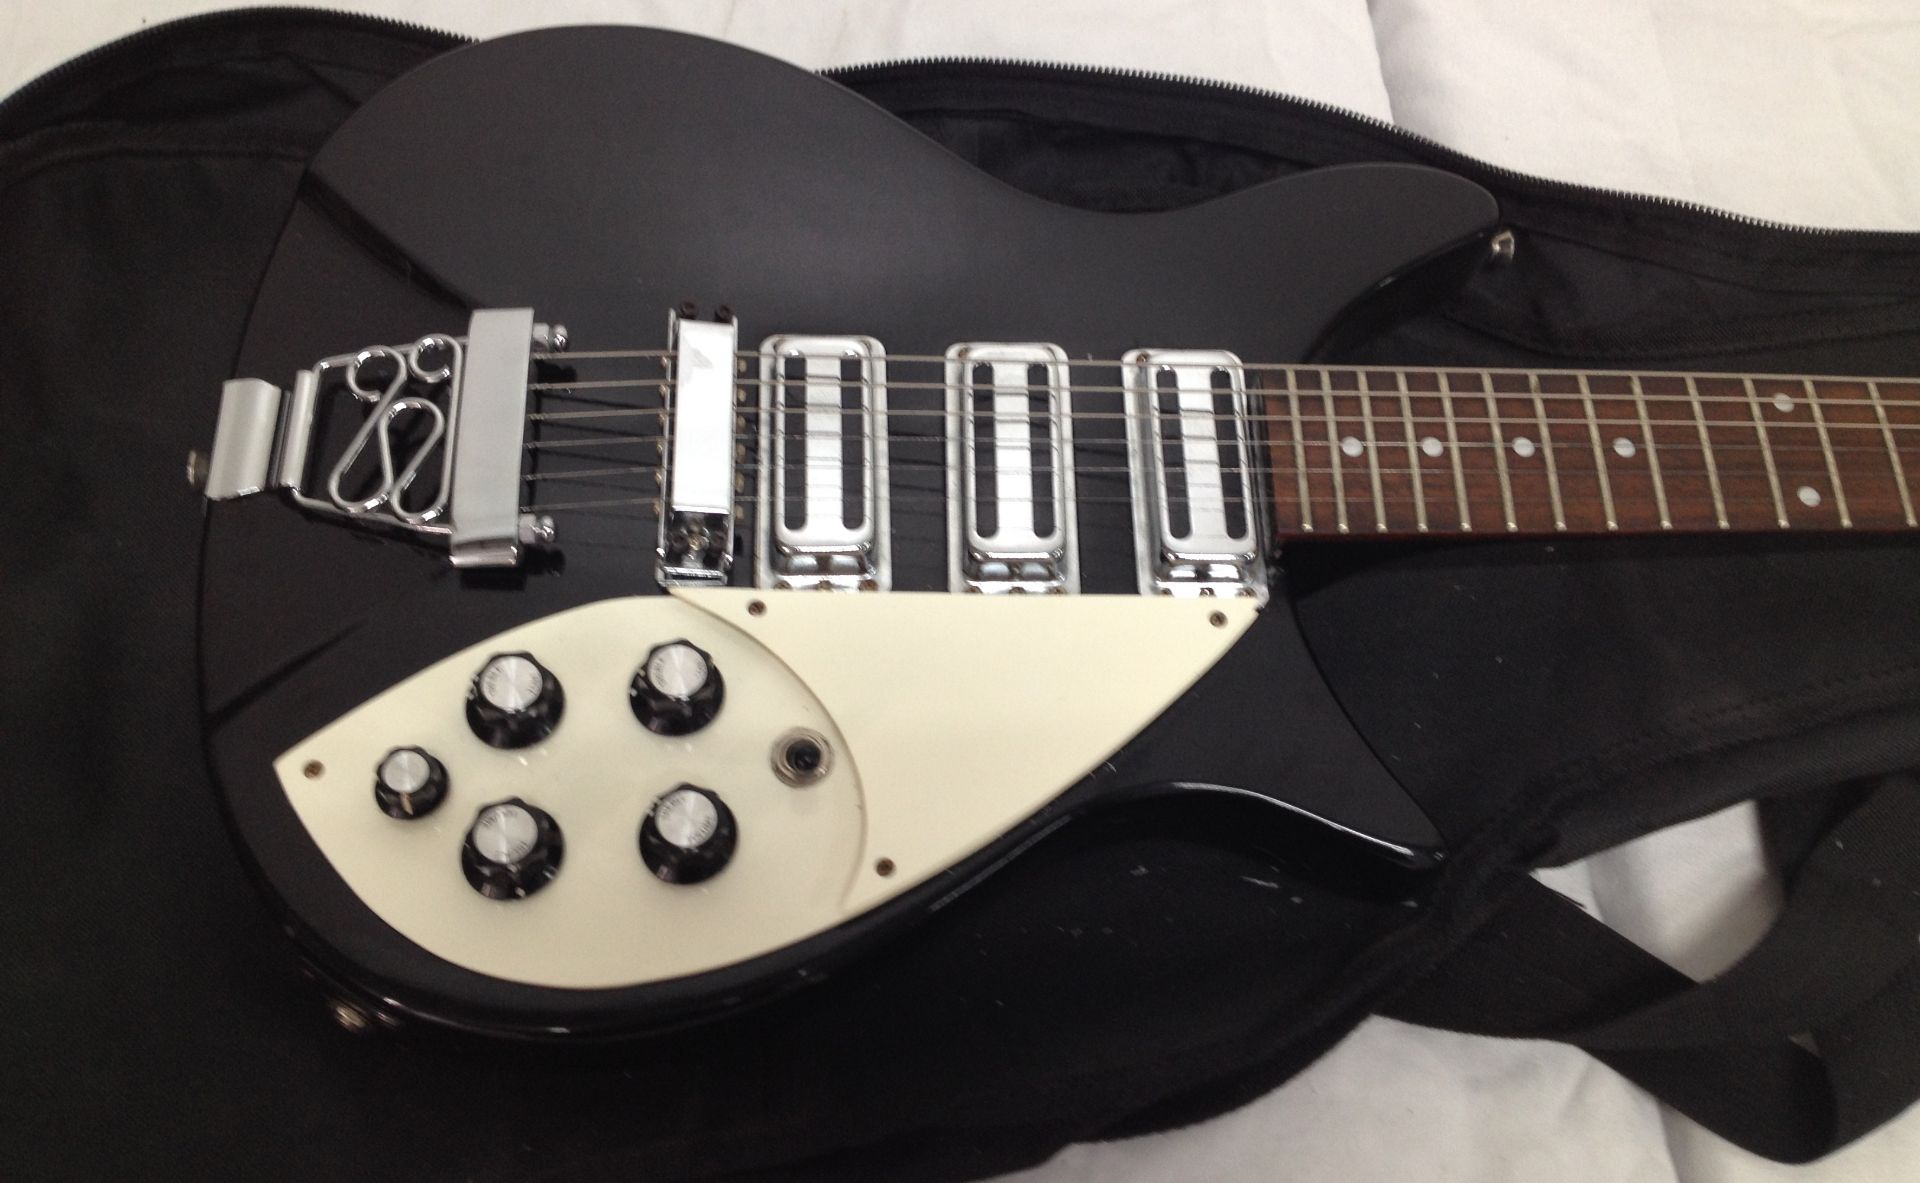 Tanglewood TW68 Electric Guitar in Black and Piano White; with Black Fabric Case - Image 3 of 4